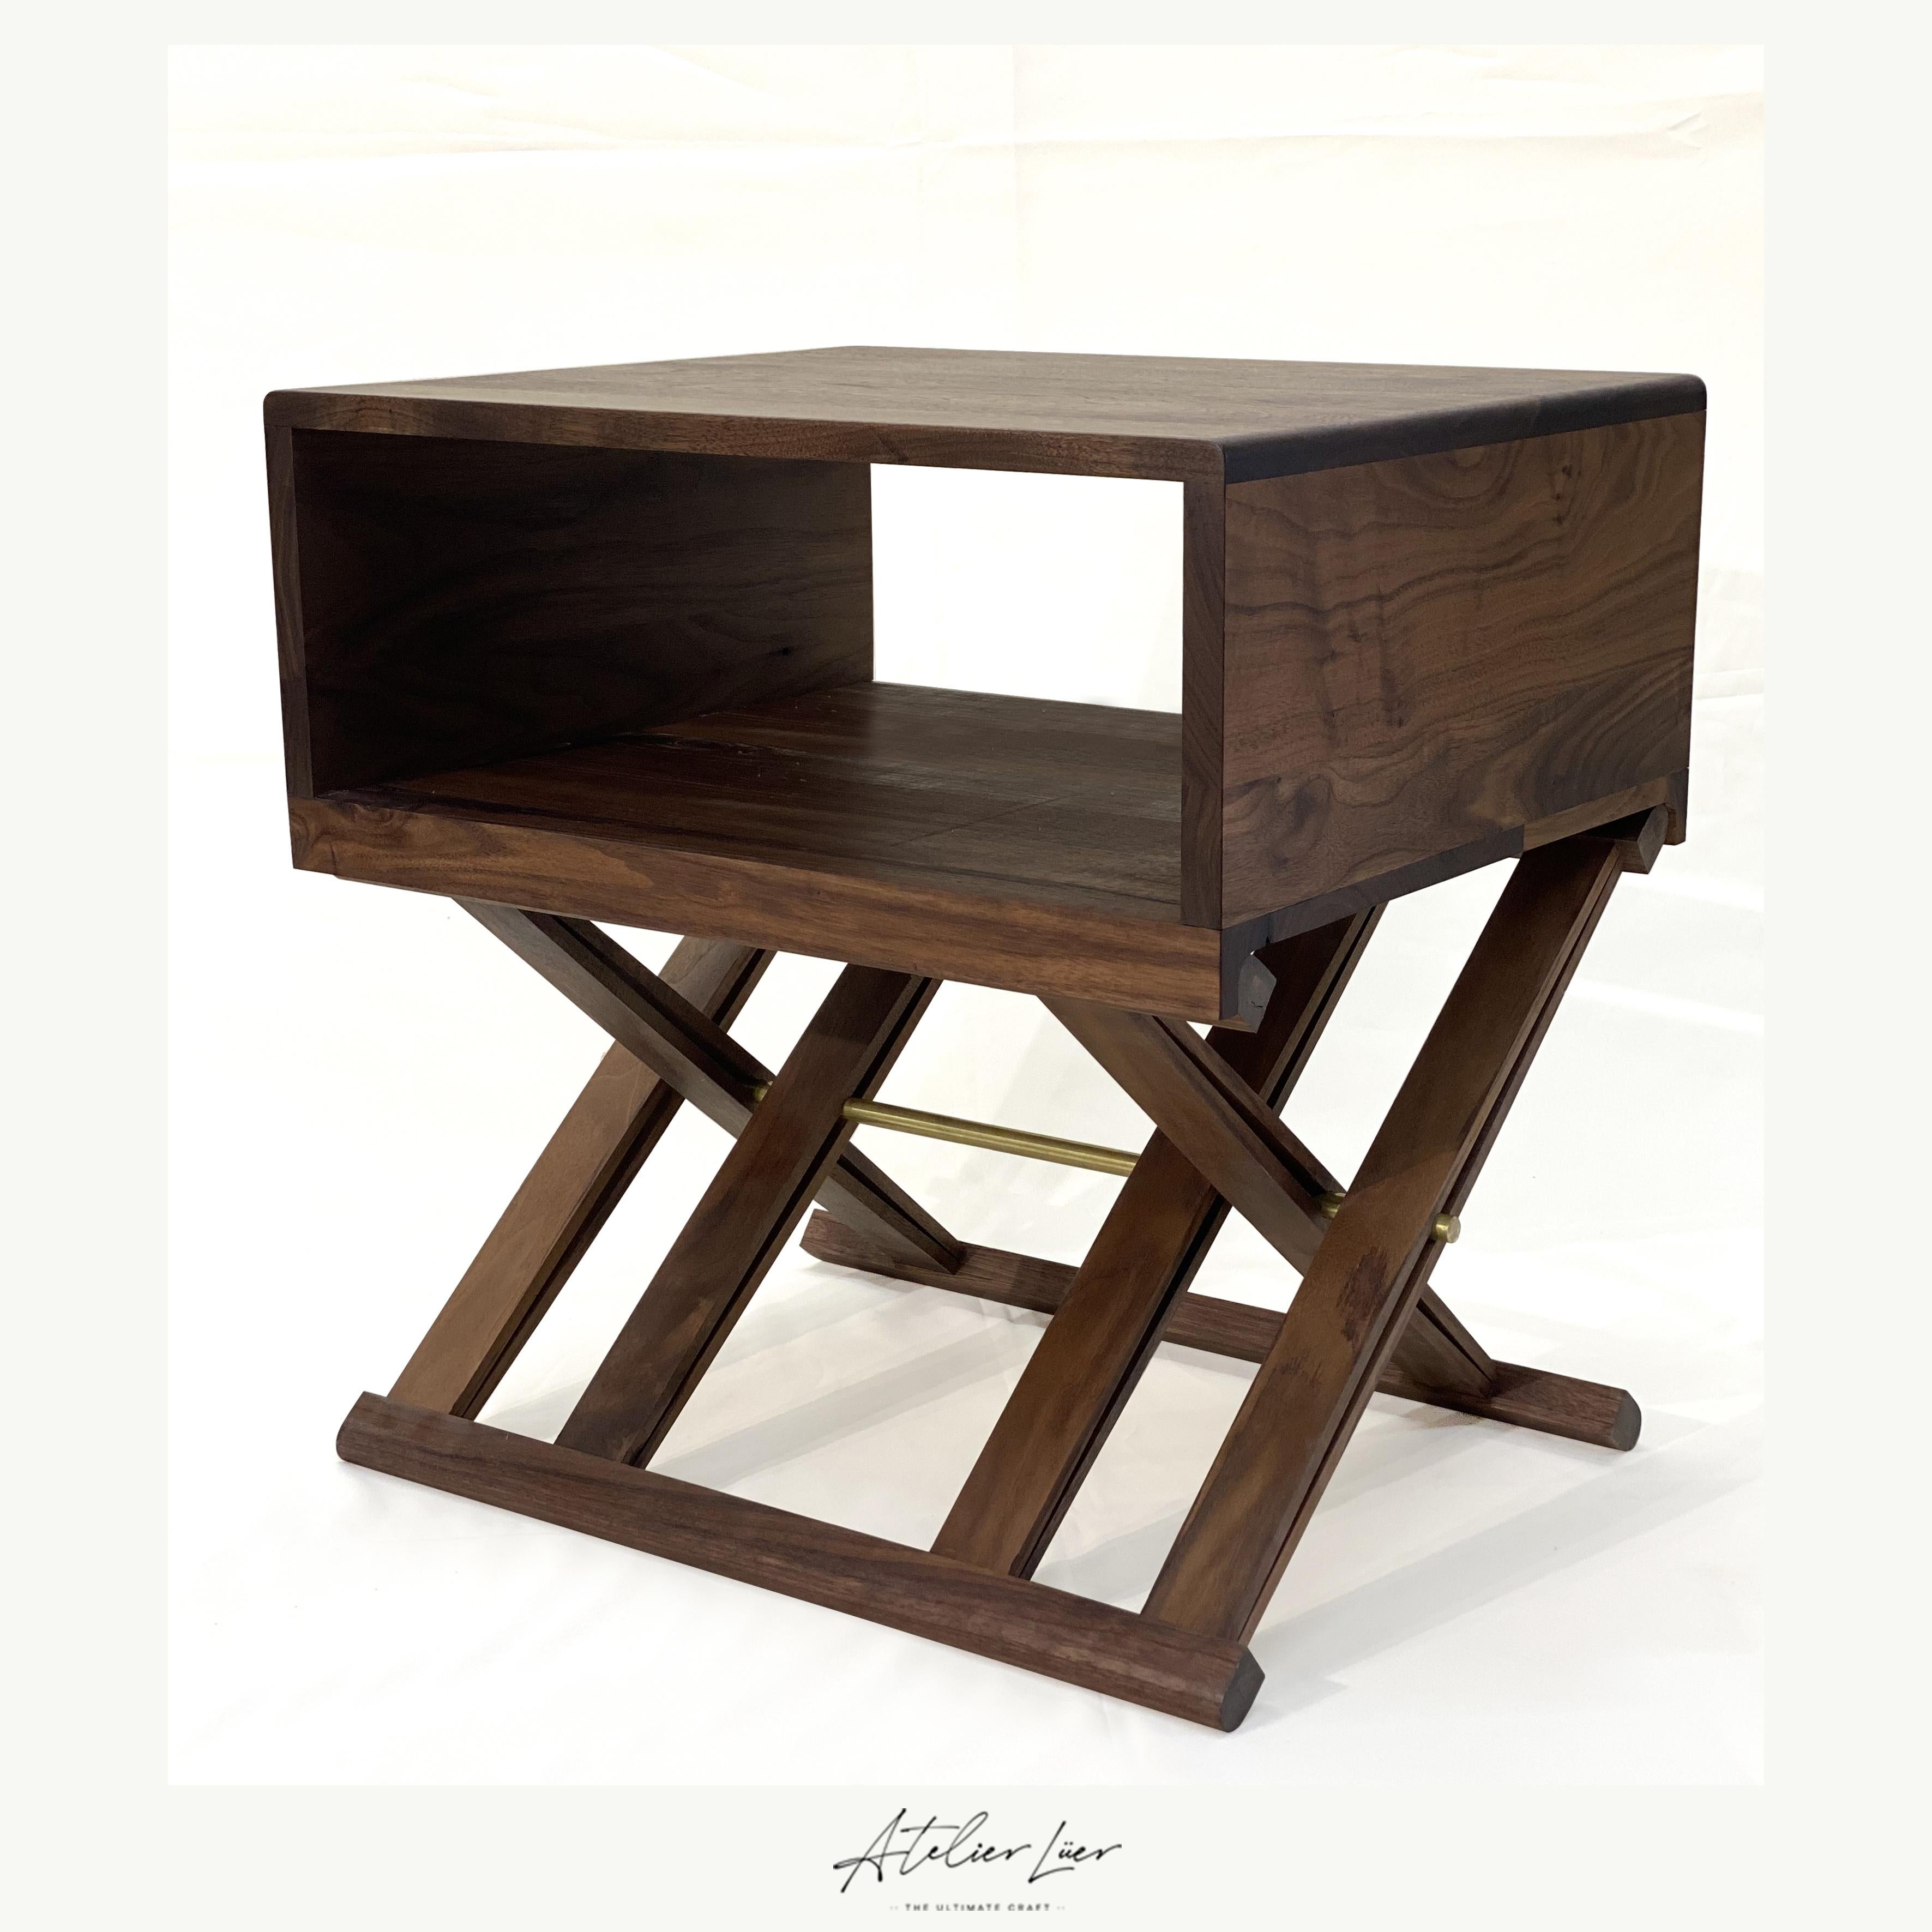 Atelier Luer open shelf solid walnut night/end table with X-Frame Base & Brass

Offered for sale is an Atelier Luer open shelf solid walnut night/side/end table with an x-frame base with brass hardware, leather straps with collapsible base and